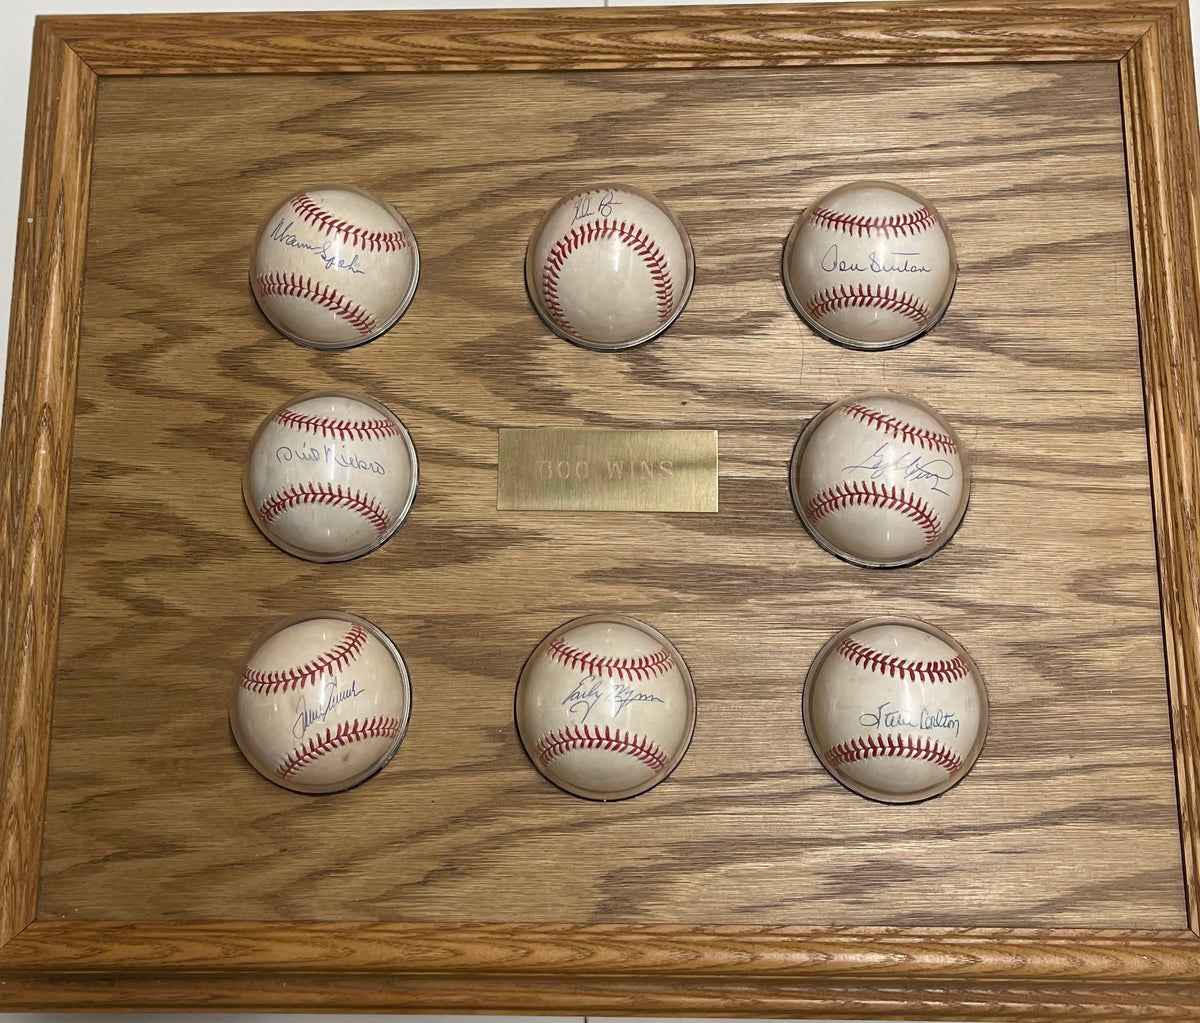 Framed Collection of Eight Signed Baseballs